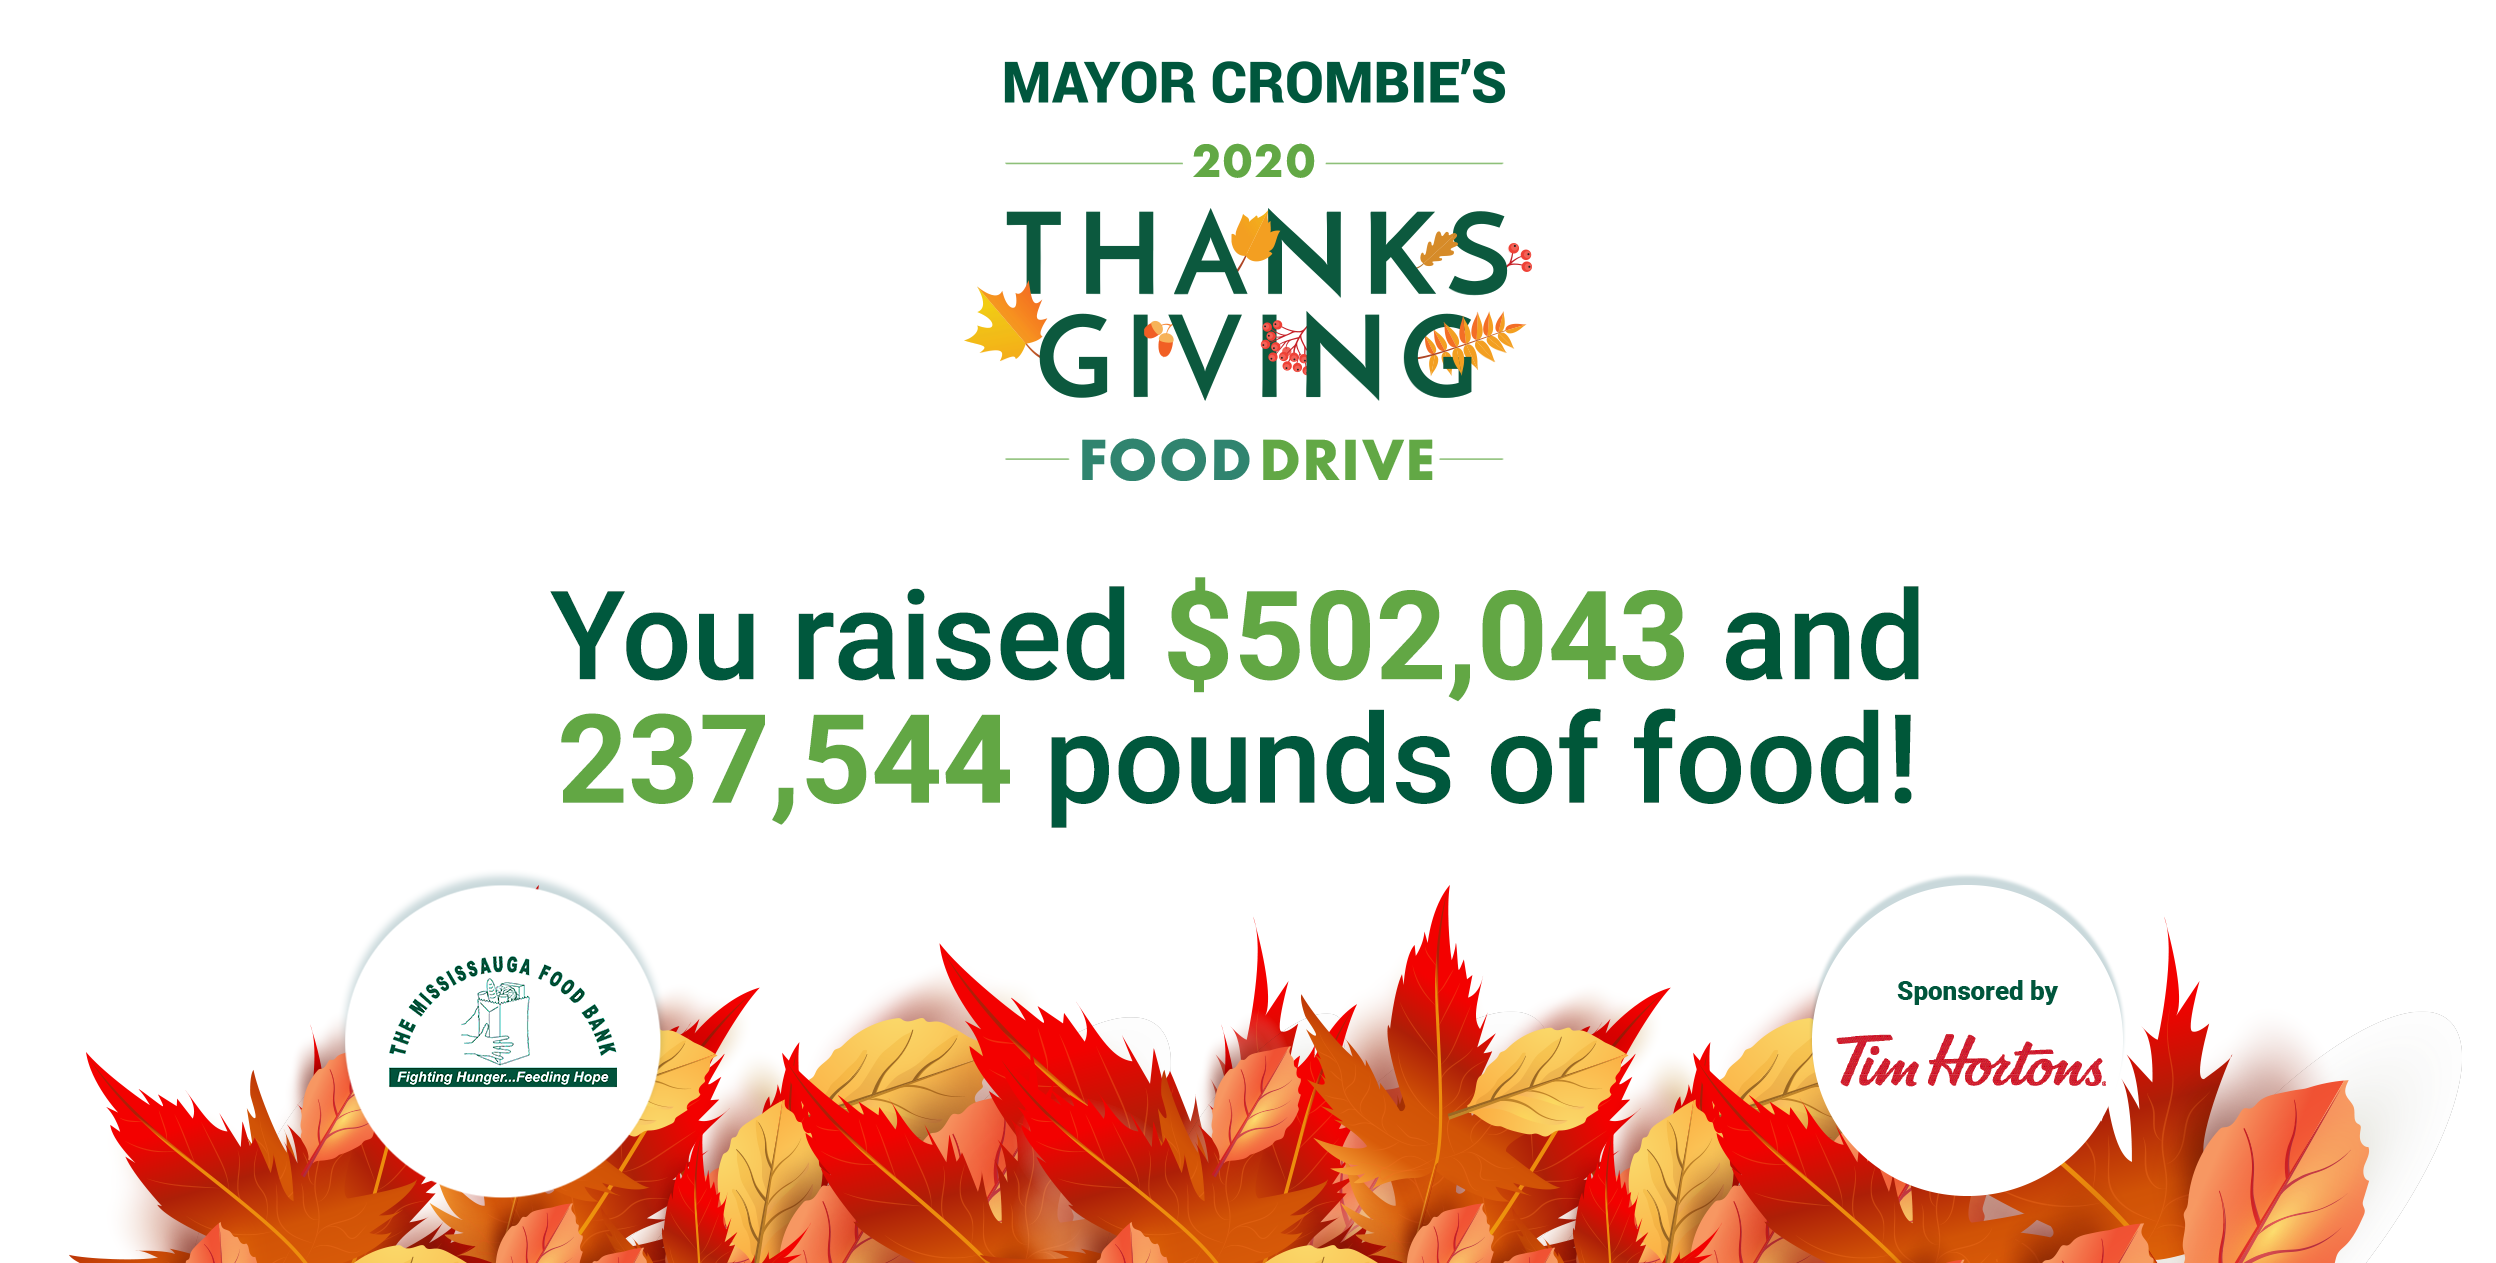 Mayor Crombie's 2020 Thanksgiving Food Drive raised %502,043 and 237,544 pounds of food.